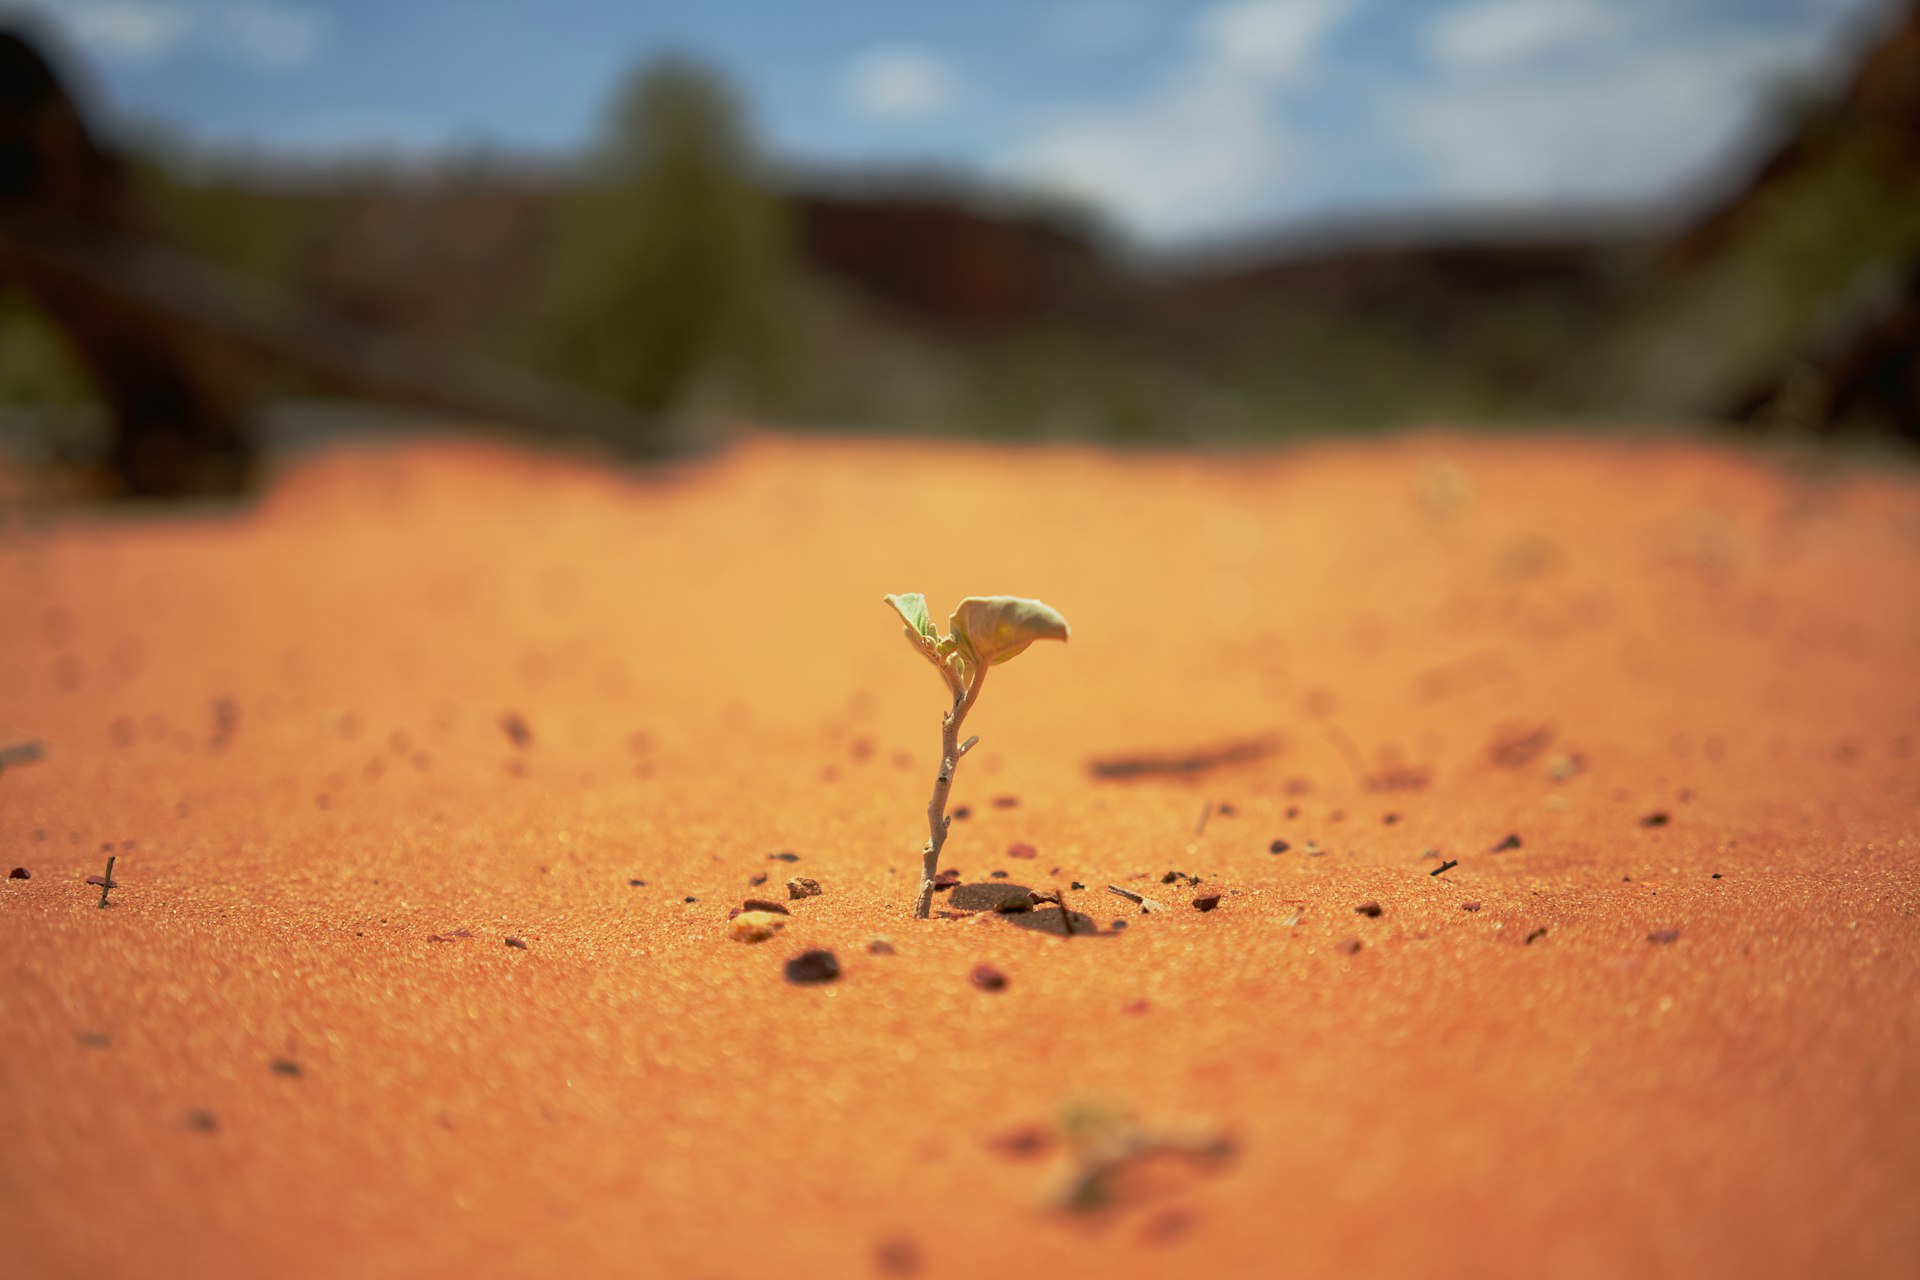 Sowing seeds in the Desert